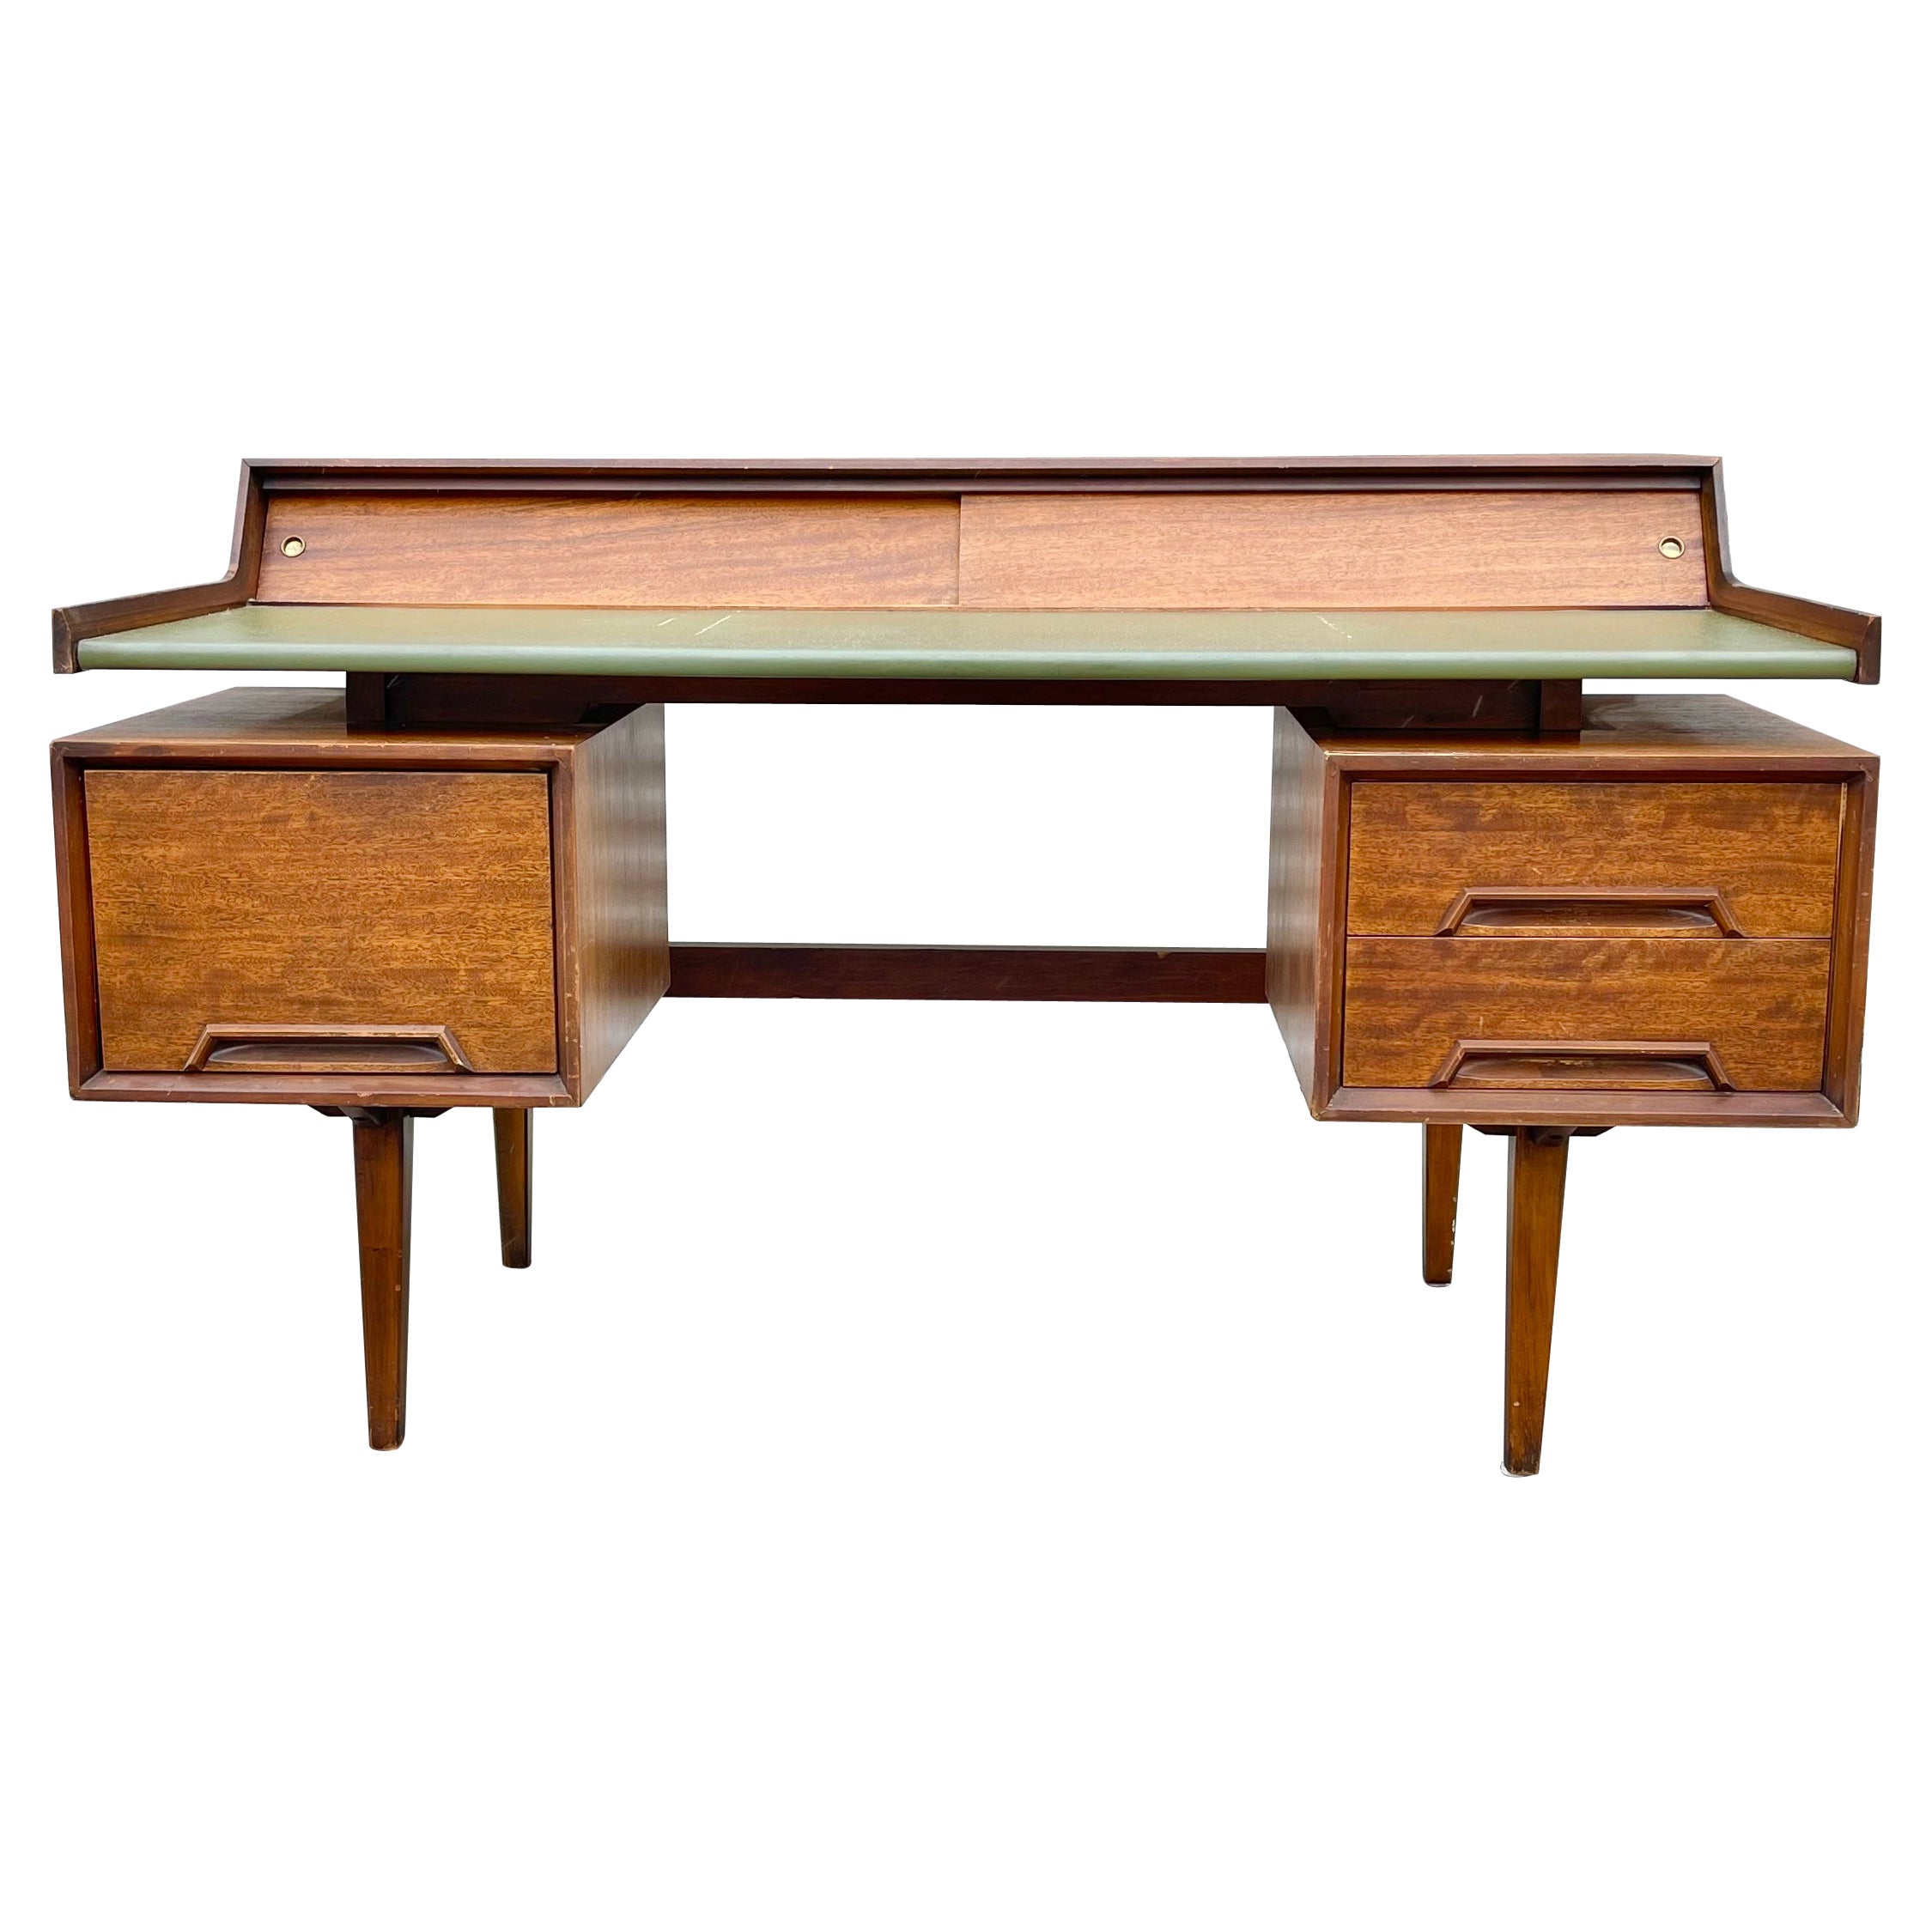 1950s Drexel "Perspective" Floating Top Desk Style After Milo Baughman For Sale